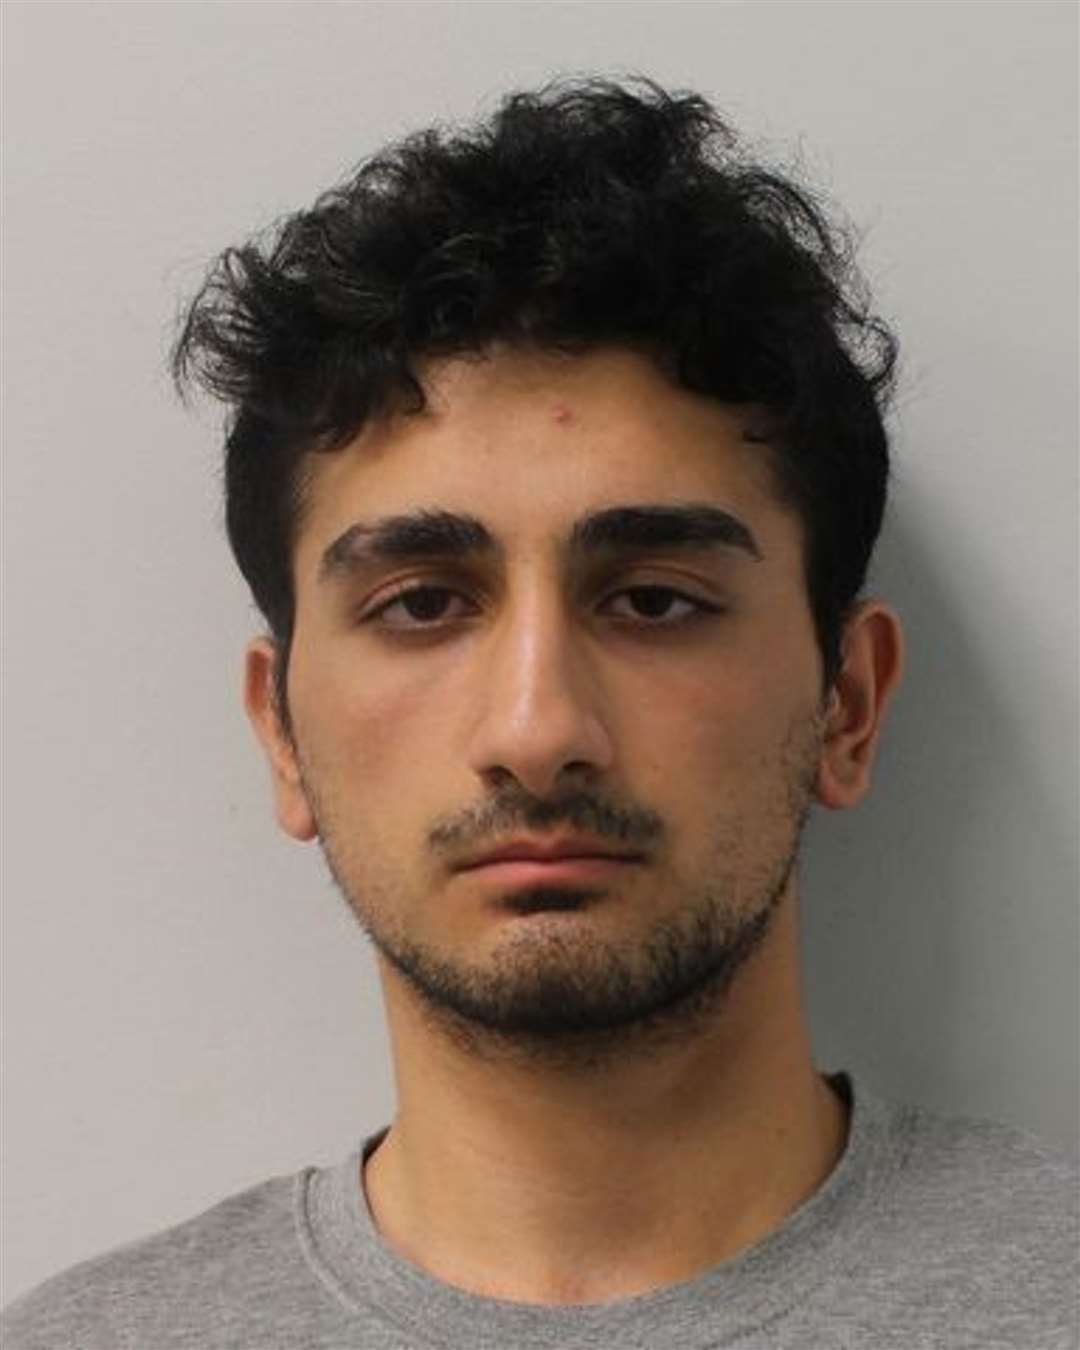 Danyal Hussein was sentenced to life in prison with a minimum term of 35 years for the murders (Metropolitan Police/PA)